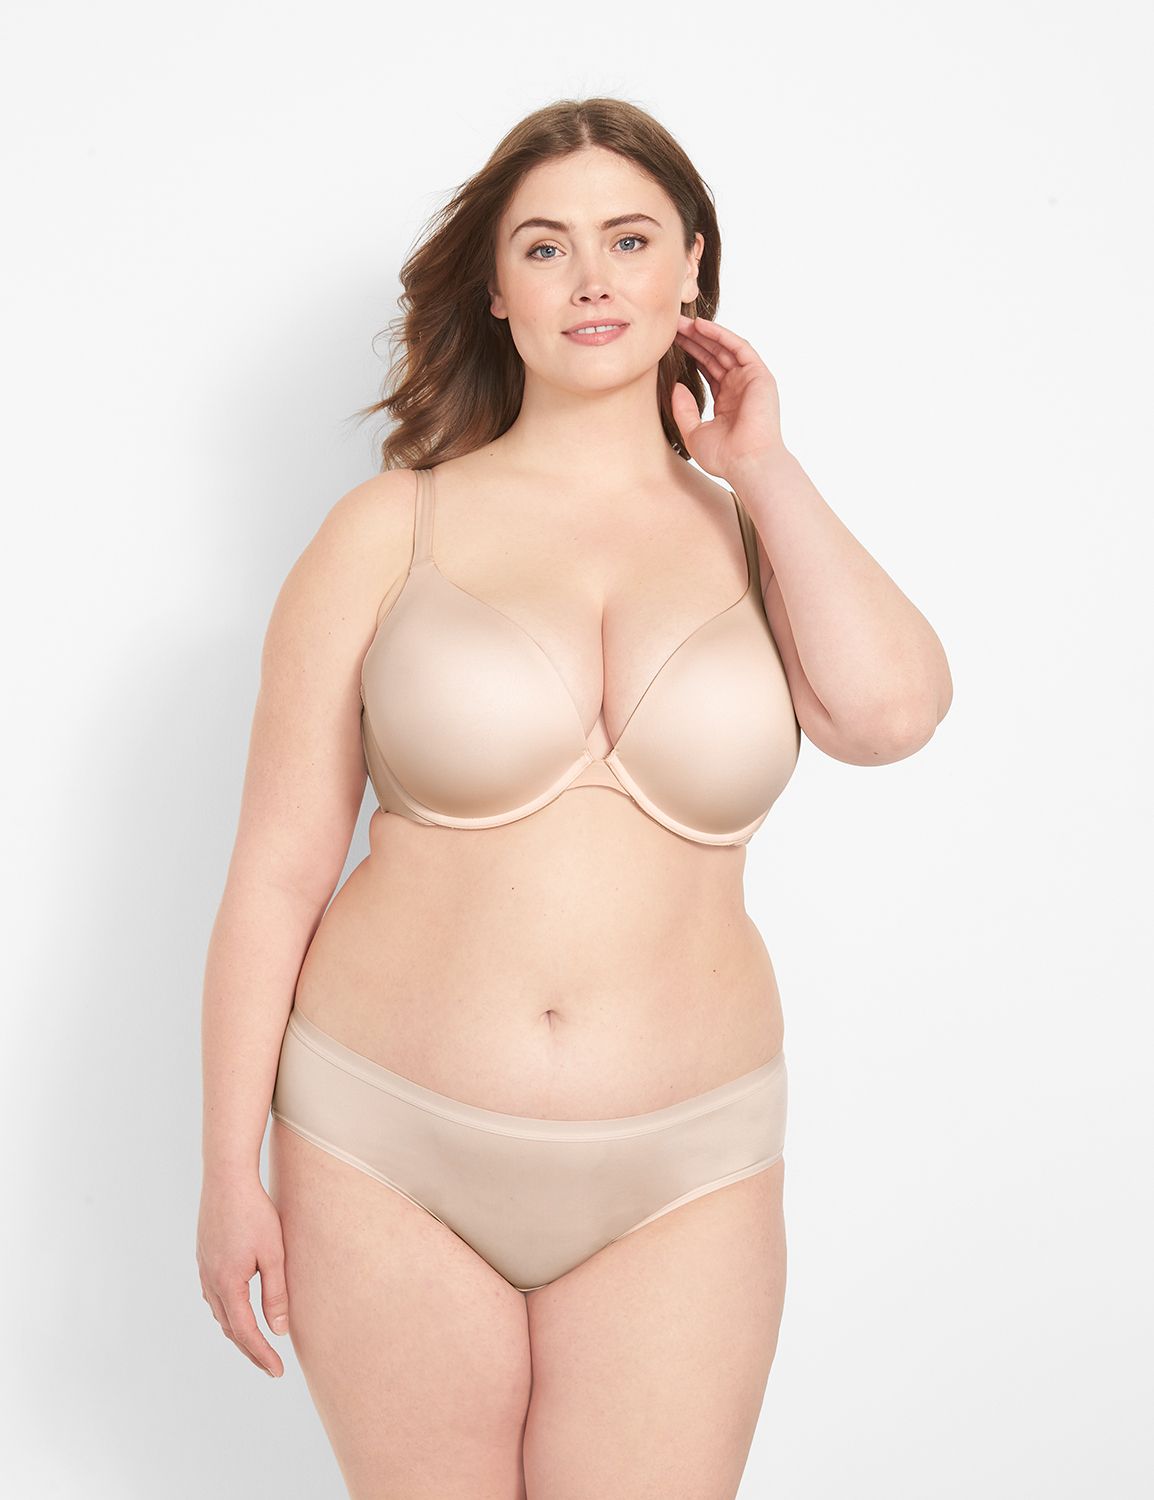 LANE BRYANT BRAS: BRAND NEW WITH TAGS!!! THE PRICE WON'T CHANGE